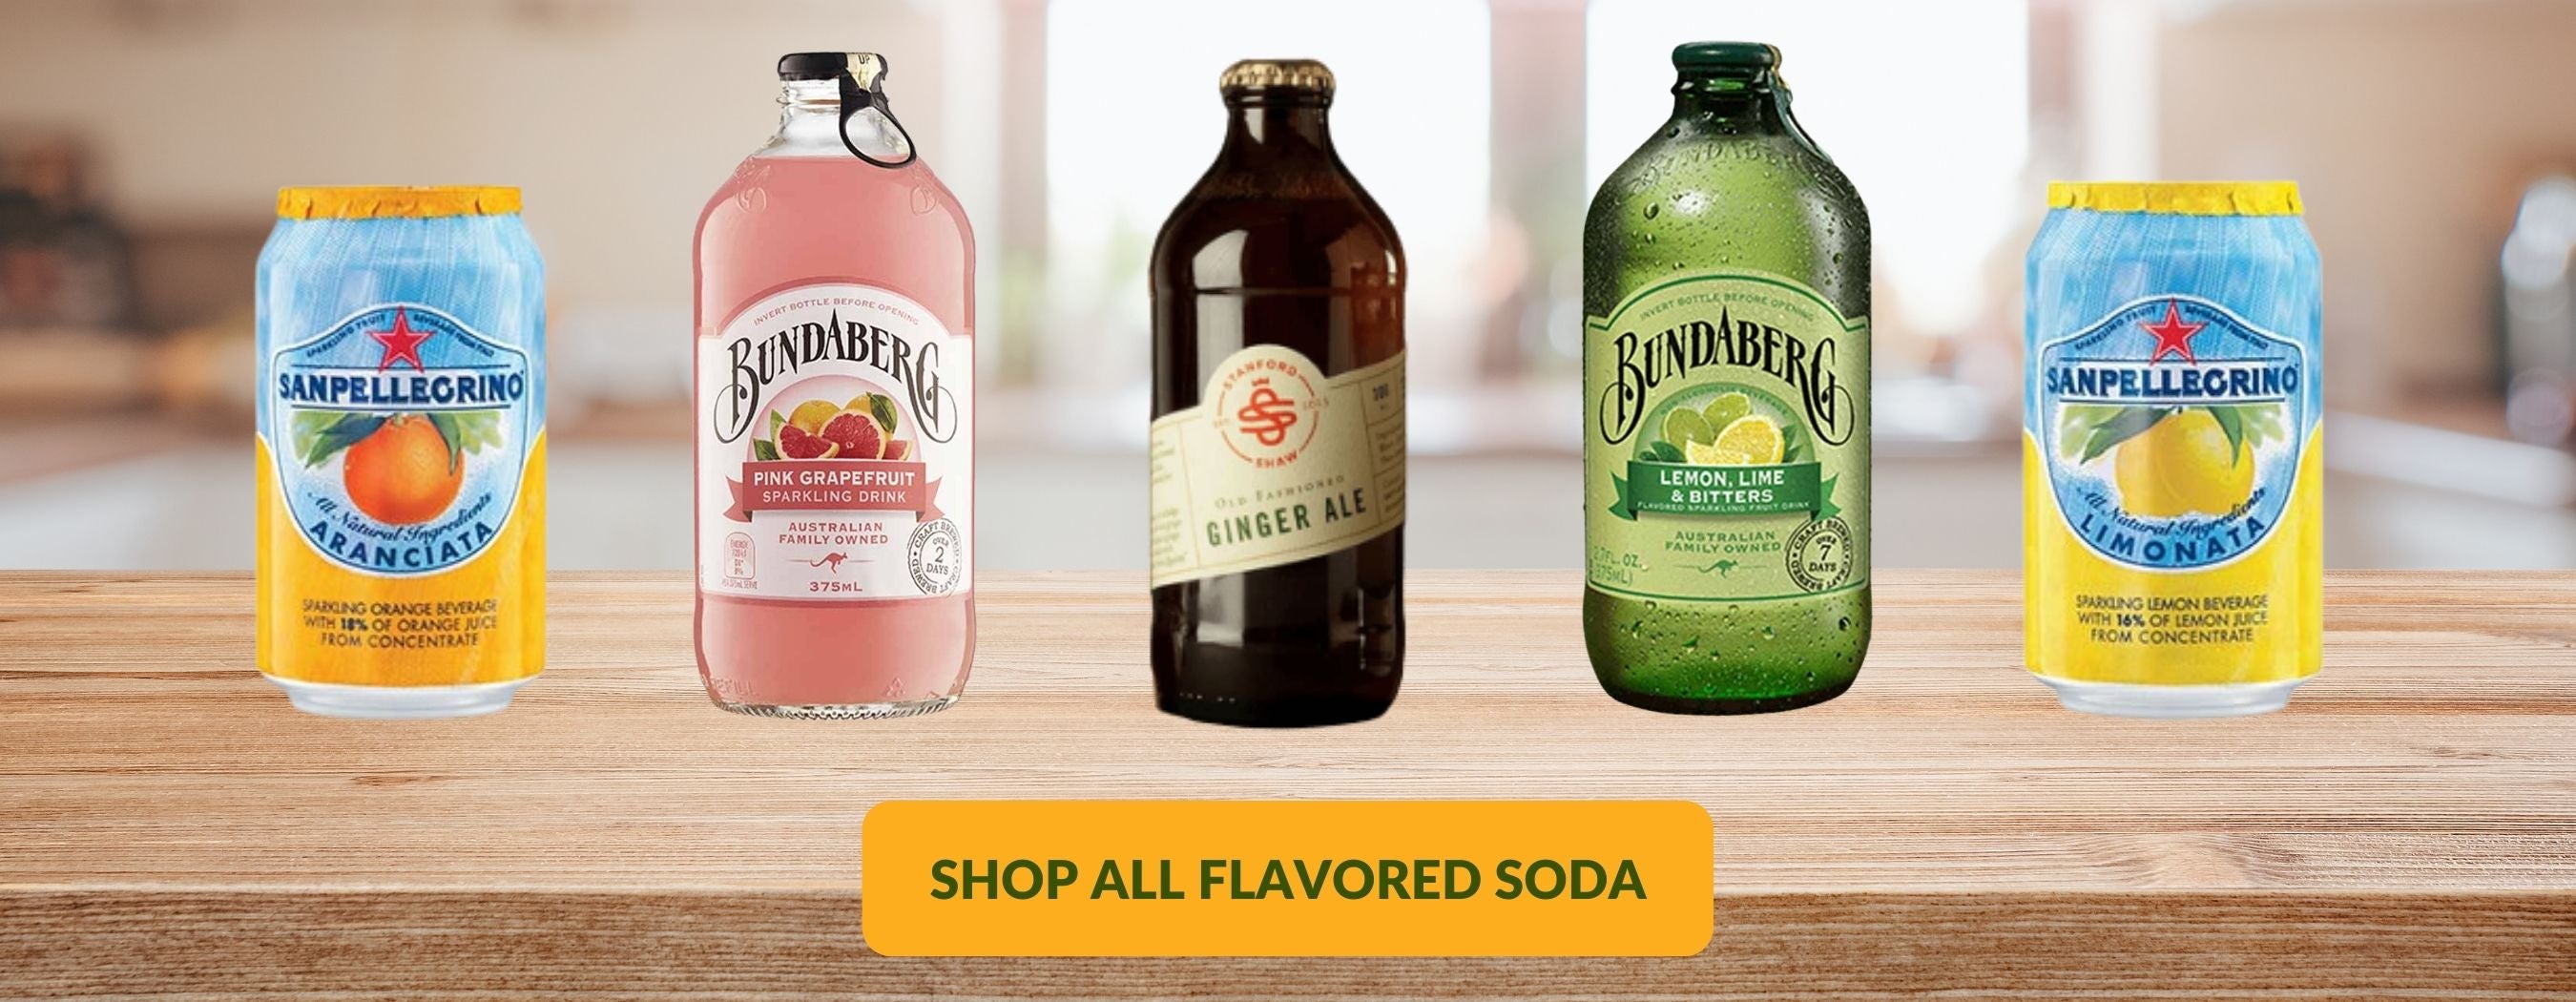 shop all flavored soda and ginger ale at best prices in philippines